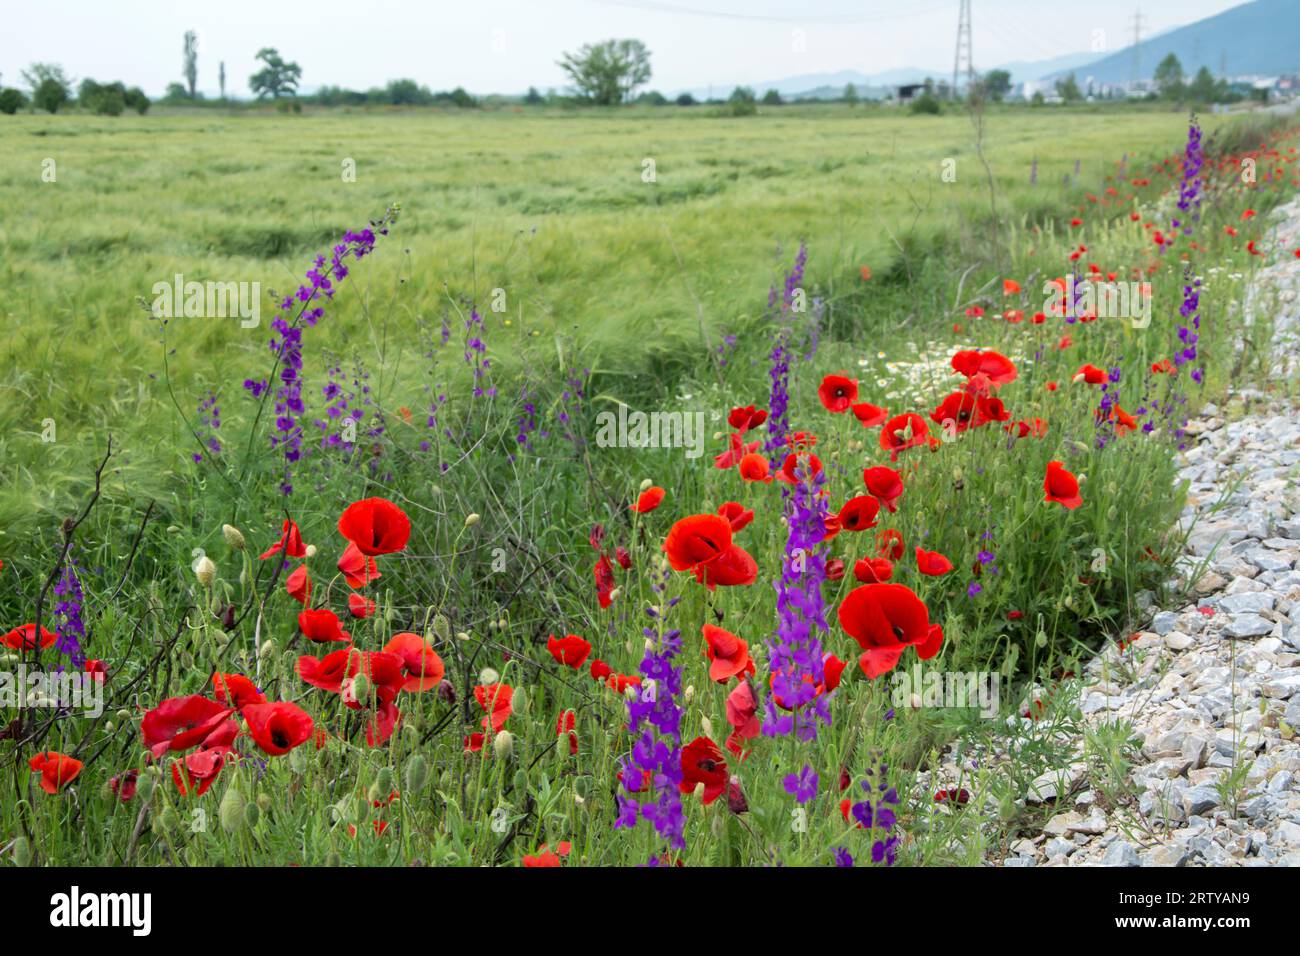 Purple larkspurр, small white chamomile and red poppy flowers blooming in early summer in a field close to the road in Bulgaria. Horizontal image with Stock Photo